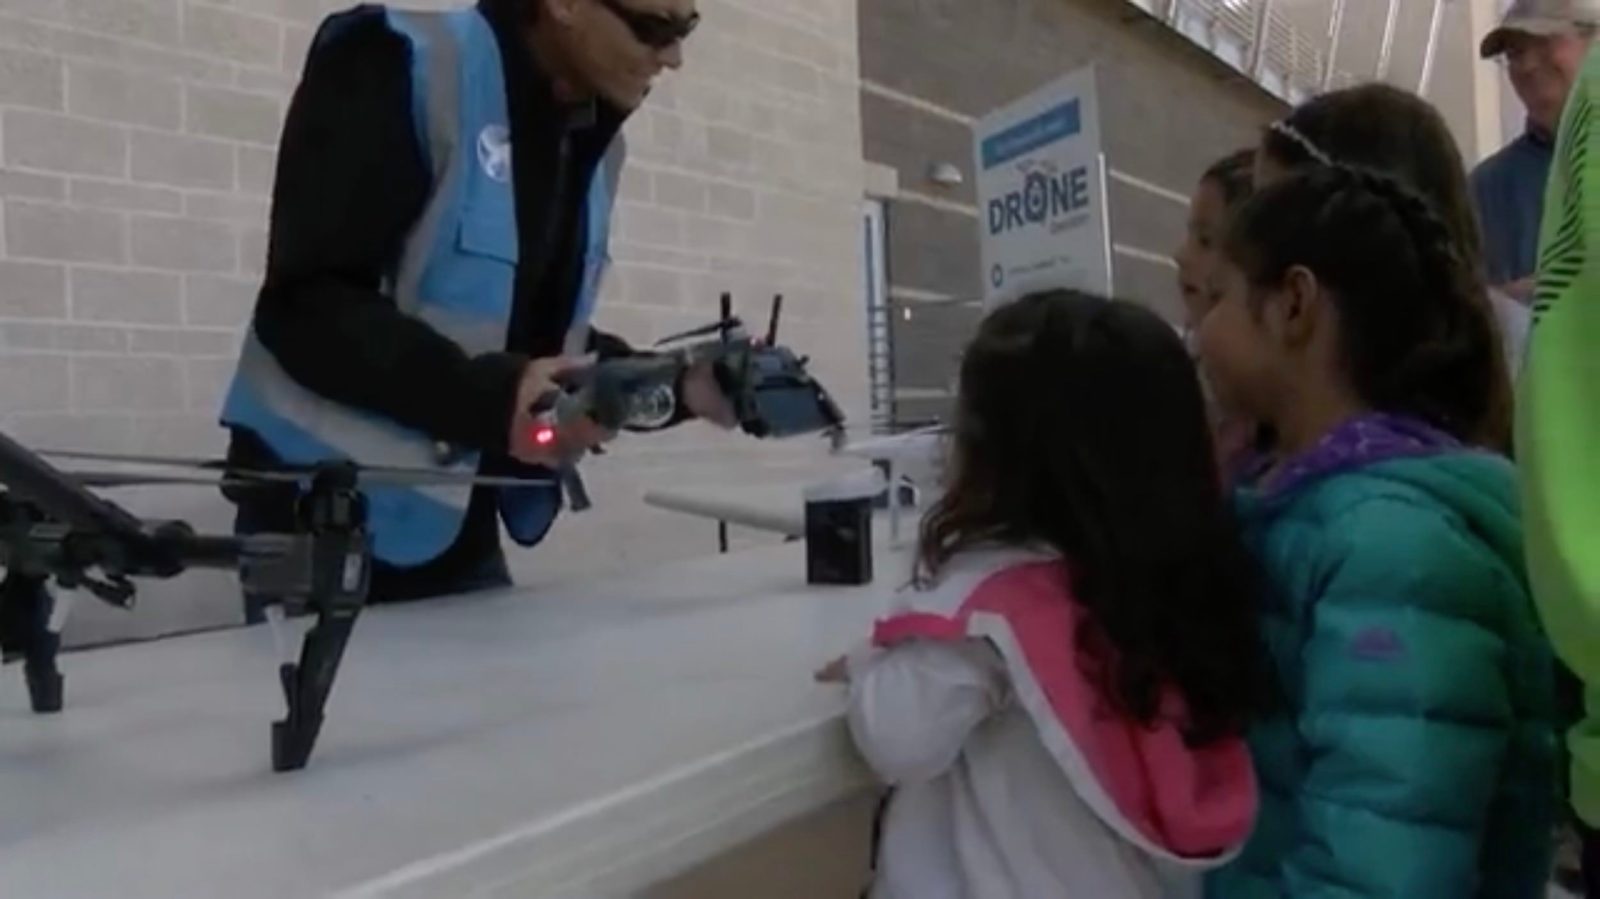 Local get introduced to drones on Drone Discovery Day